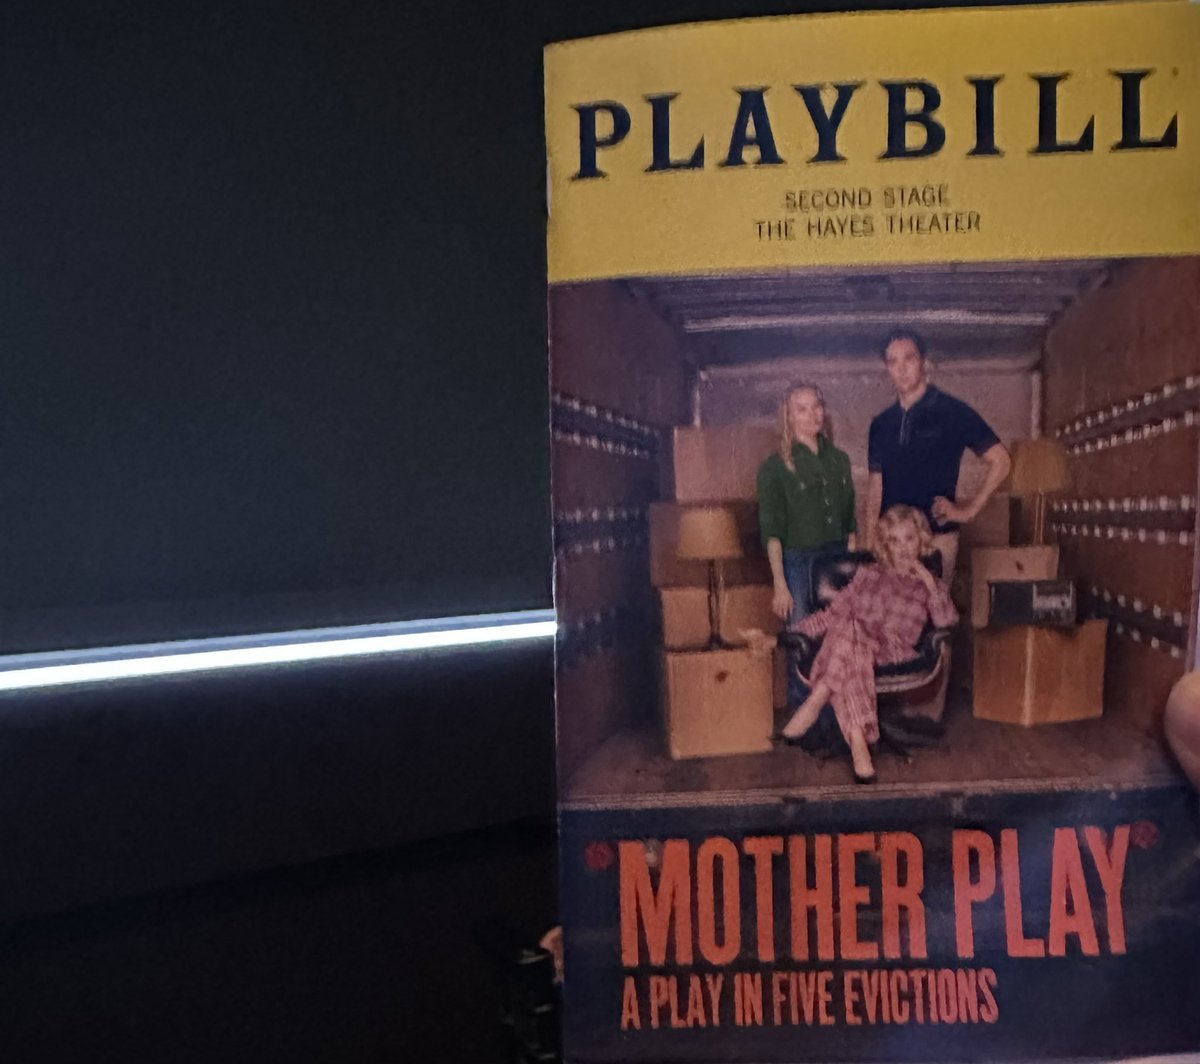 @2STNYC #motherplay This team works flawlessly starting with Vogel. The fine tuned cast dispenses every emotion possible. Bravo